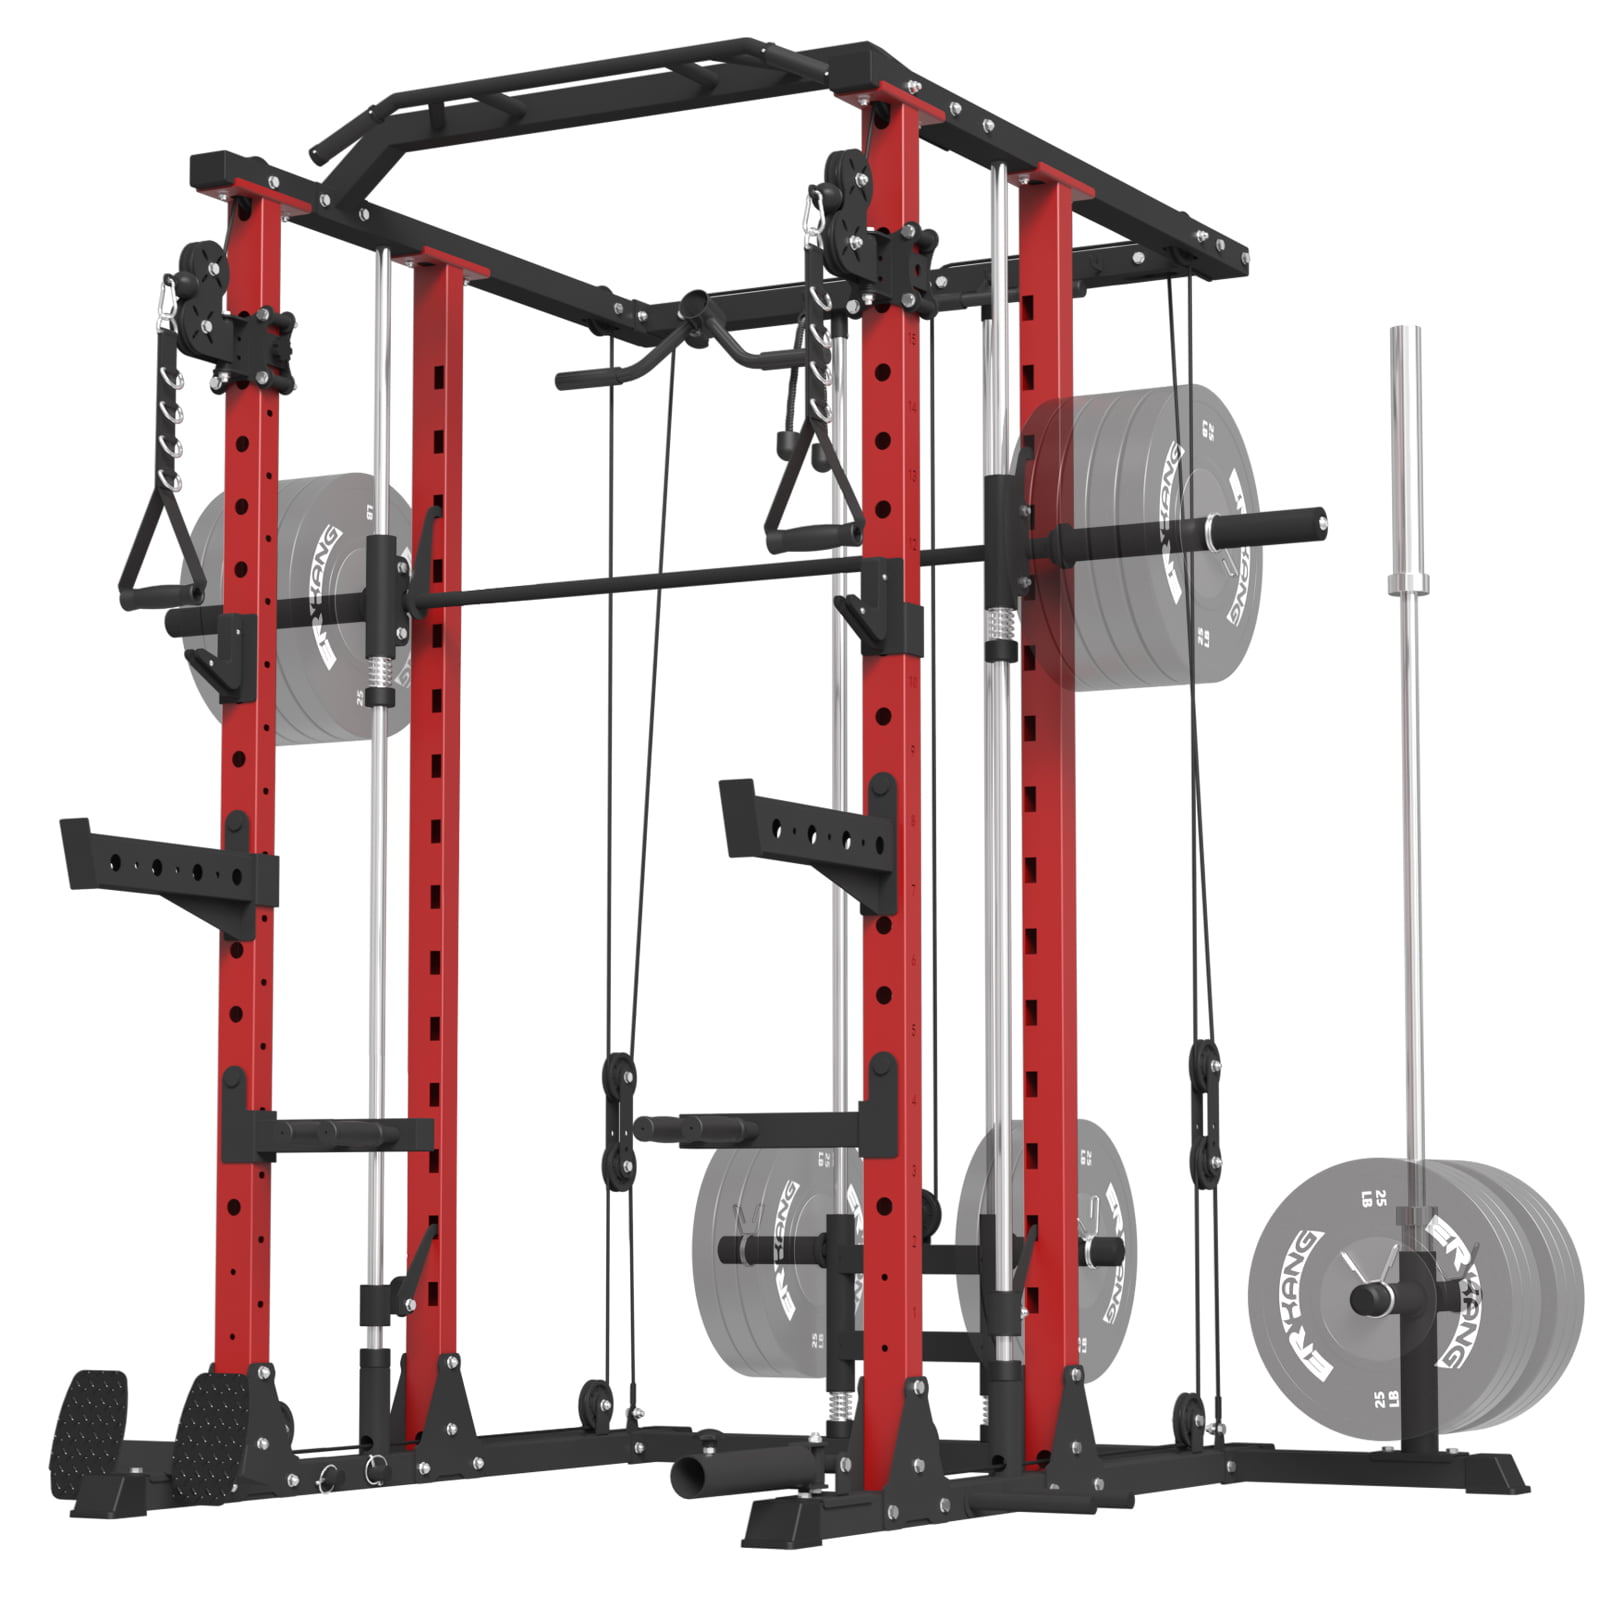 Symmetrie Knorrig transfusie ER KANG Smith Machine Home Gym, 2000LB Smith Rack with Cable Crossover and  LAT Pull Down System, Home Gym Equipment - Walmart.com